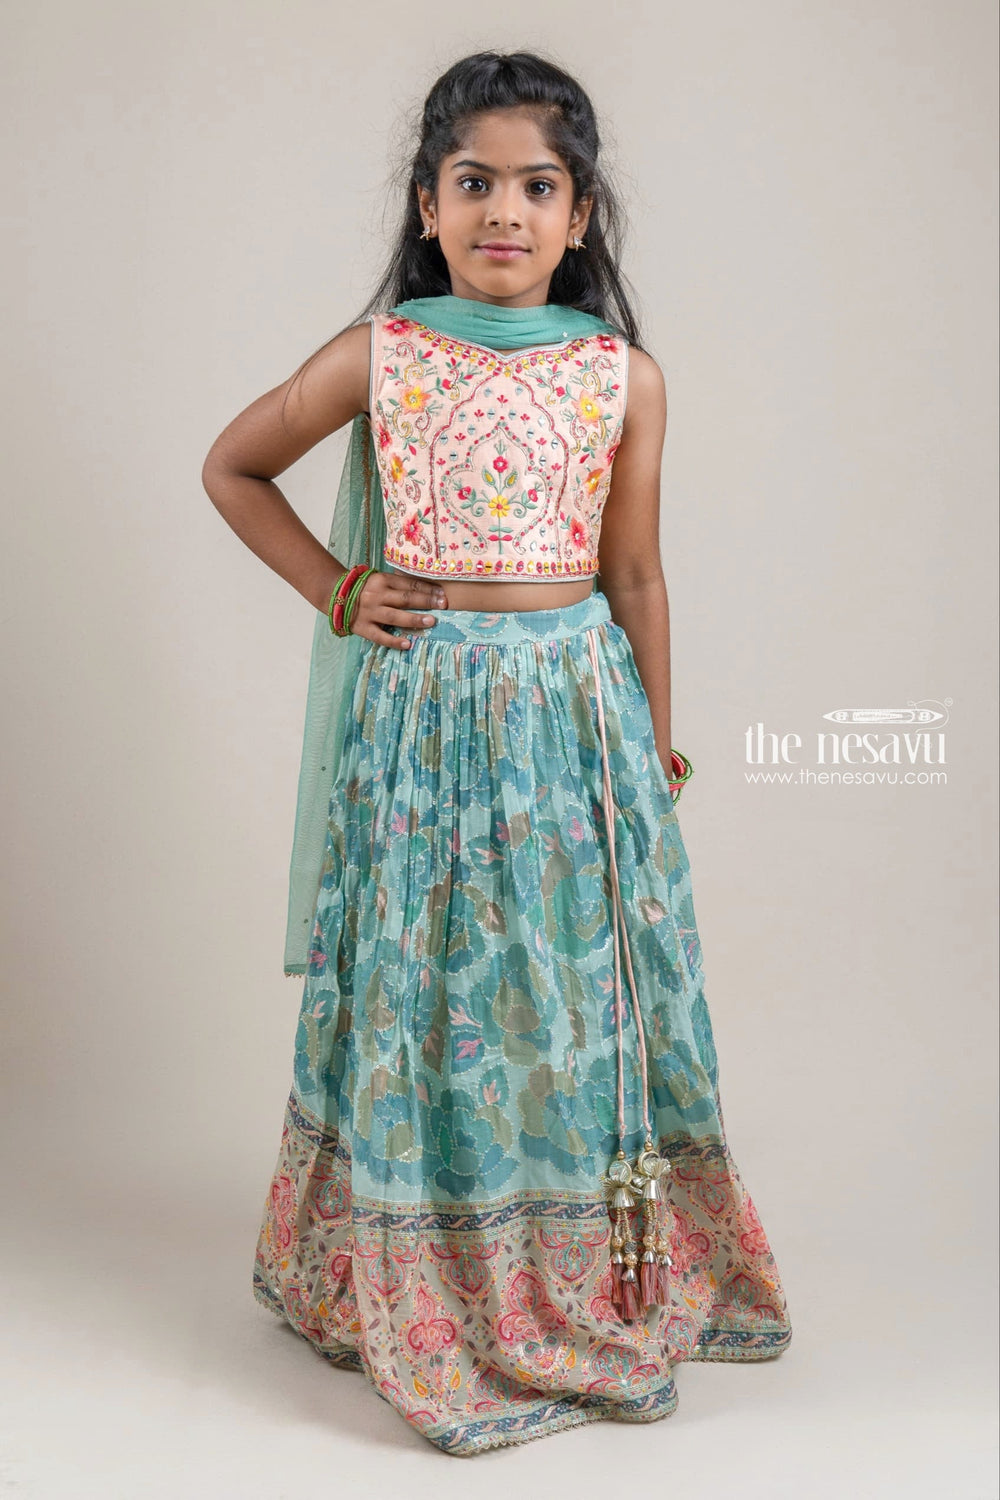 The Nesavu Lehenga & Ghagra Glitter Sequined Floral Embroidered Salmon Pink Crop Top with Pleated Floral Printed Green Lehenga Choli for Girls Nesavu 24 (5Y) / Green / Georgette GL344-24 Glitter Sequin and Floral Embroidered Lehenga Choli for Girls | The Nesavu